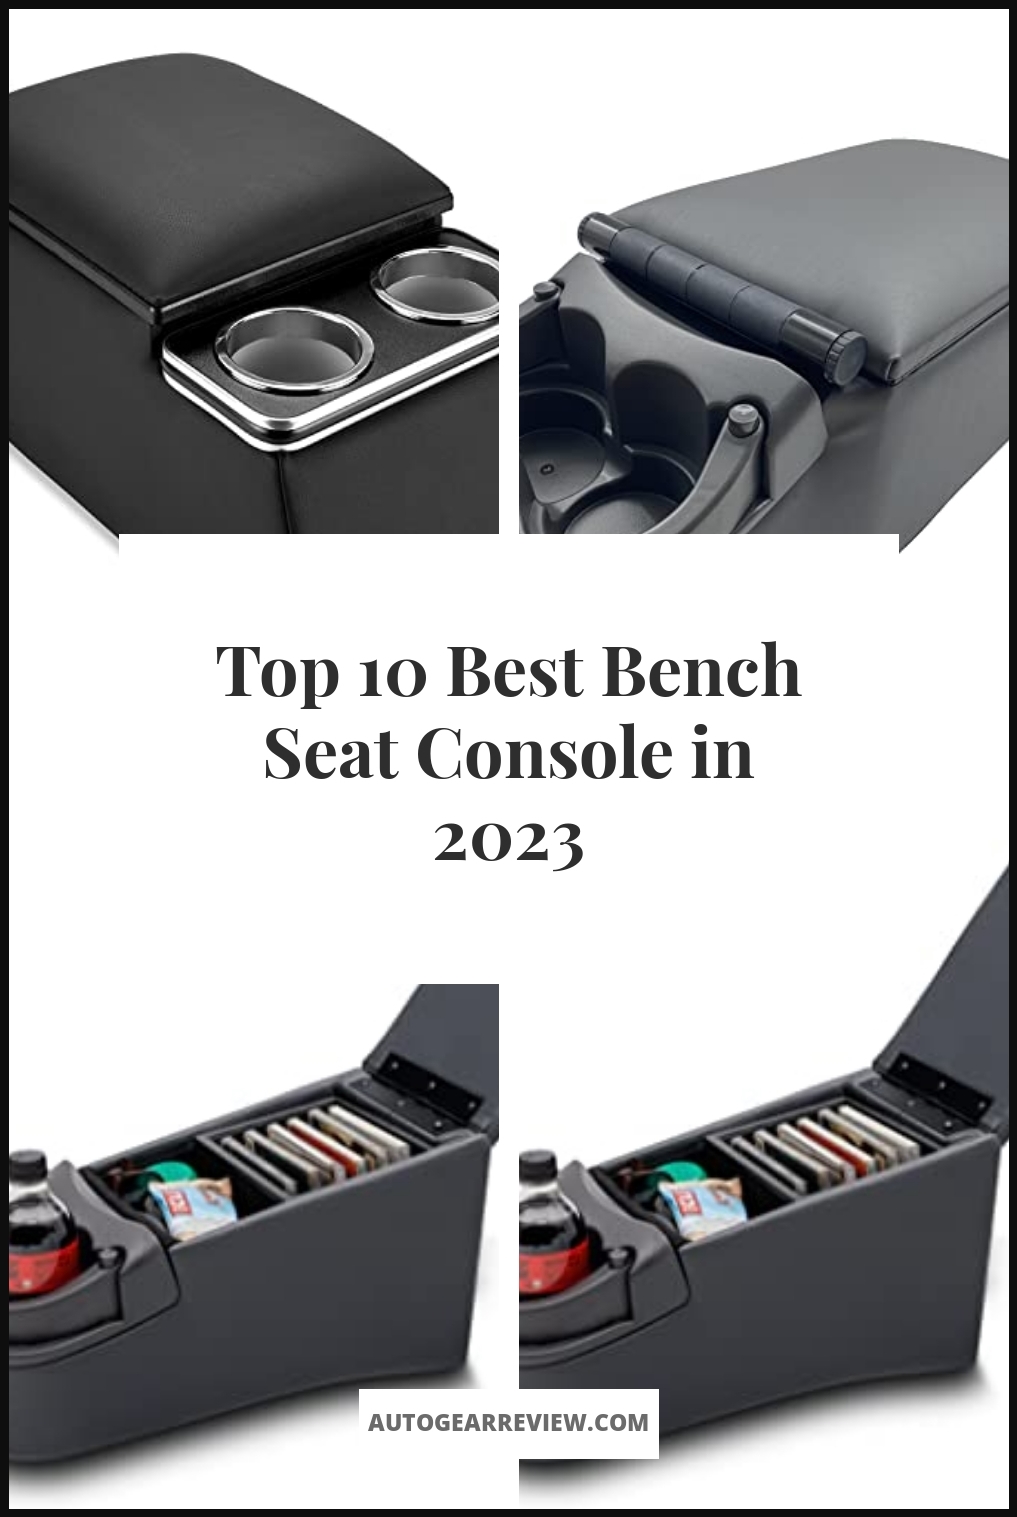 Best Bench Seat Console - Buying Guide